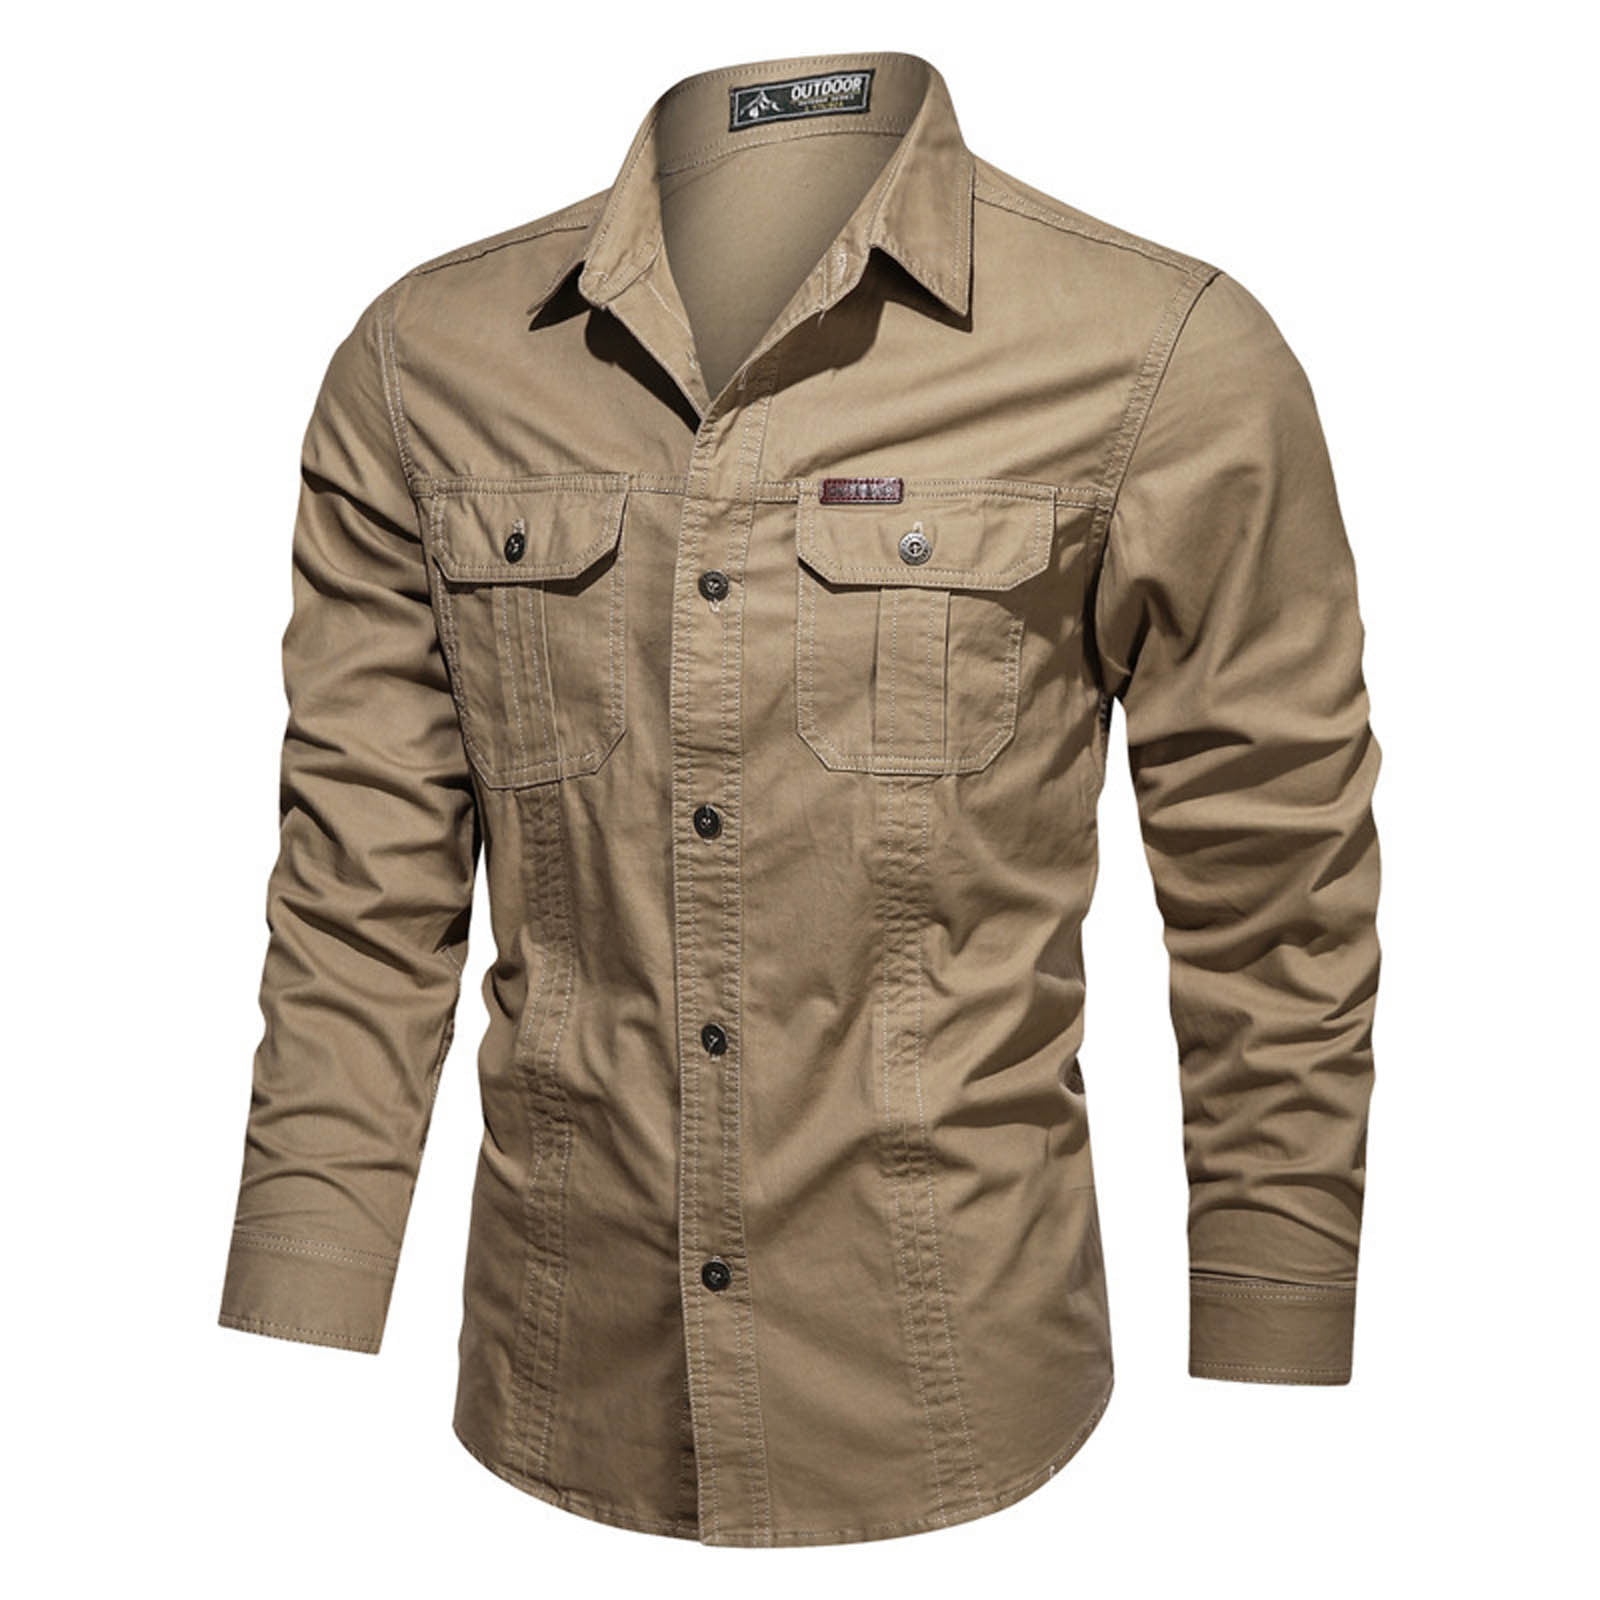 YYDGH Shirts for Men Long Sleeve Military Button Up Work Shirt